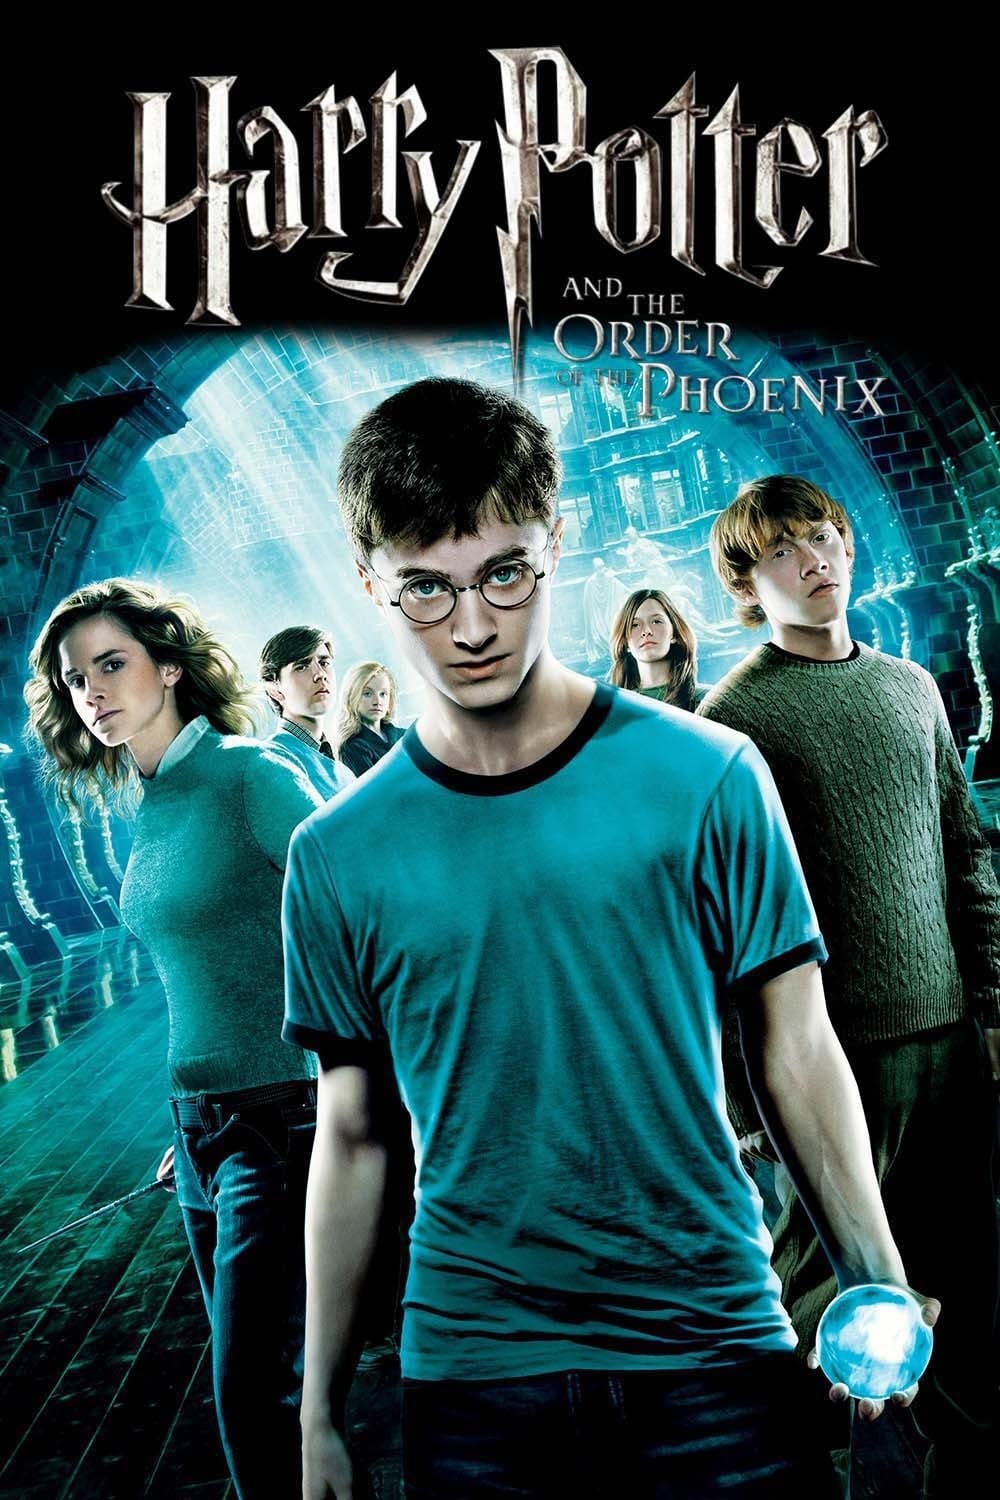 Harry Potter 5 and the Order of Phoenix DVD MOVIE emma watson 5th